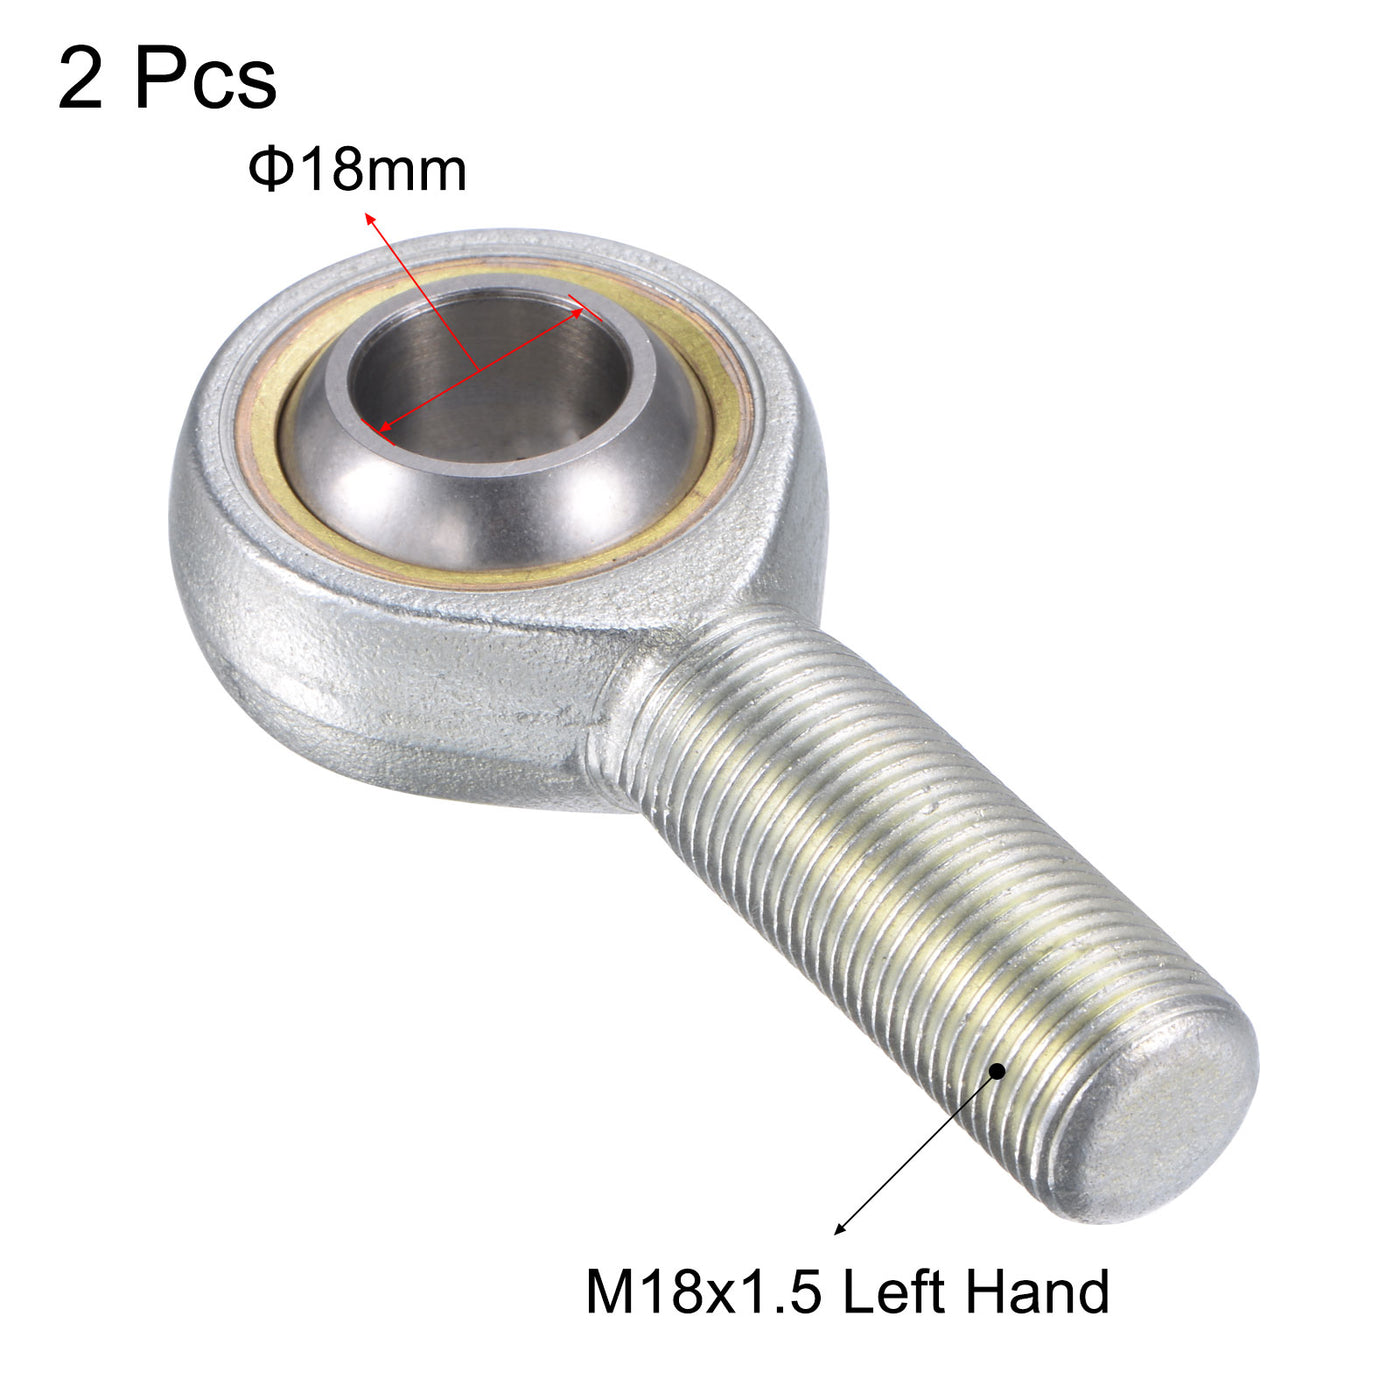 uxcell Uxcell 2pcs SA18TK POSA18 Rod End Bearing 18mm Bore M18x1.5 Left Hand Male Thread